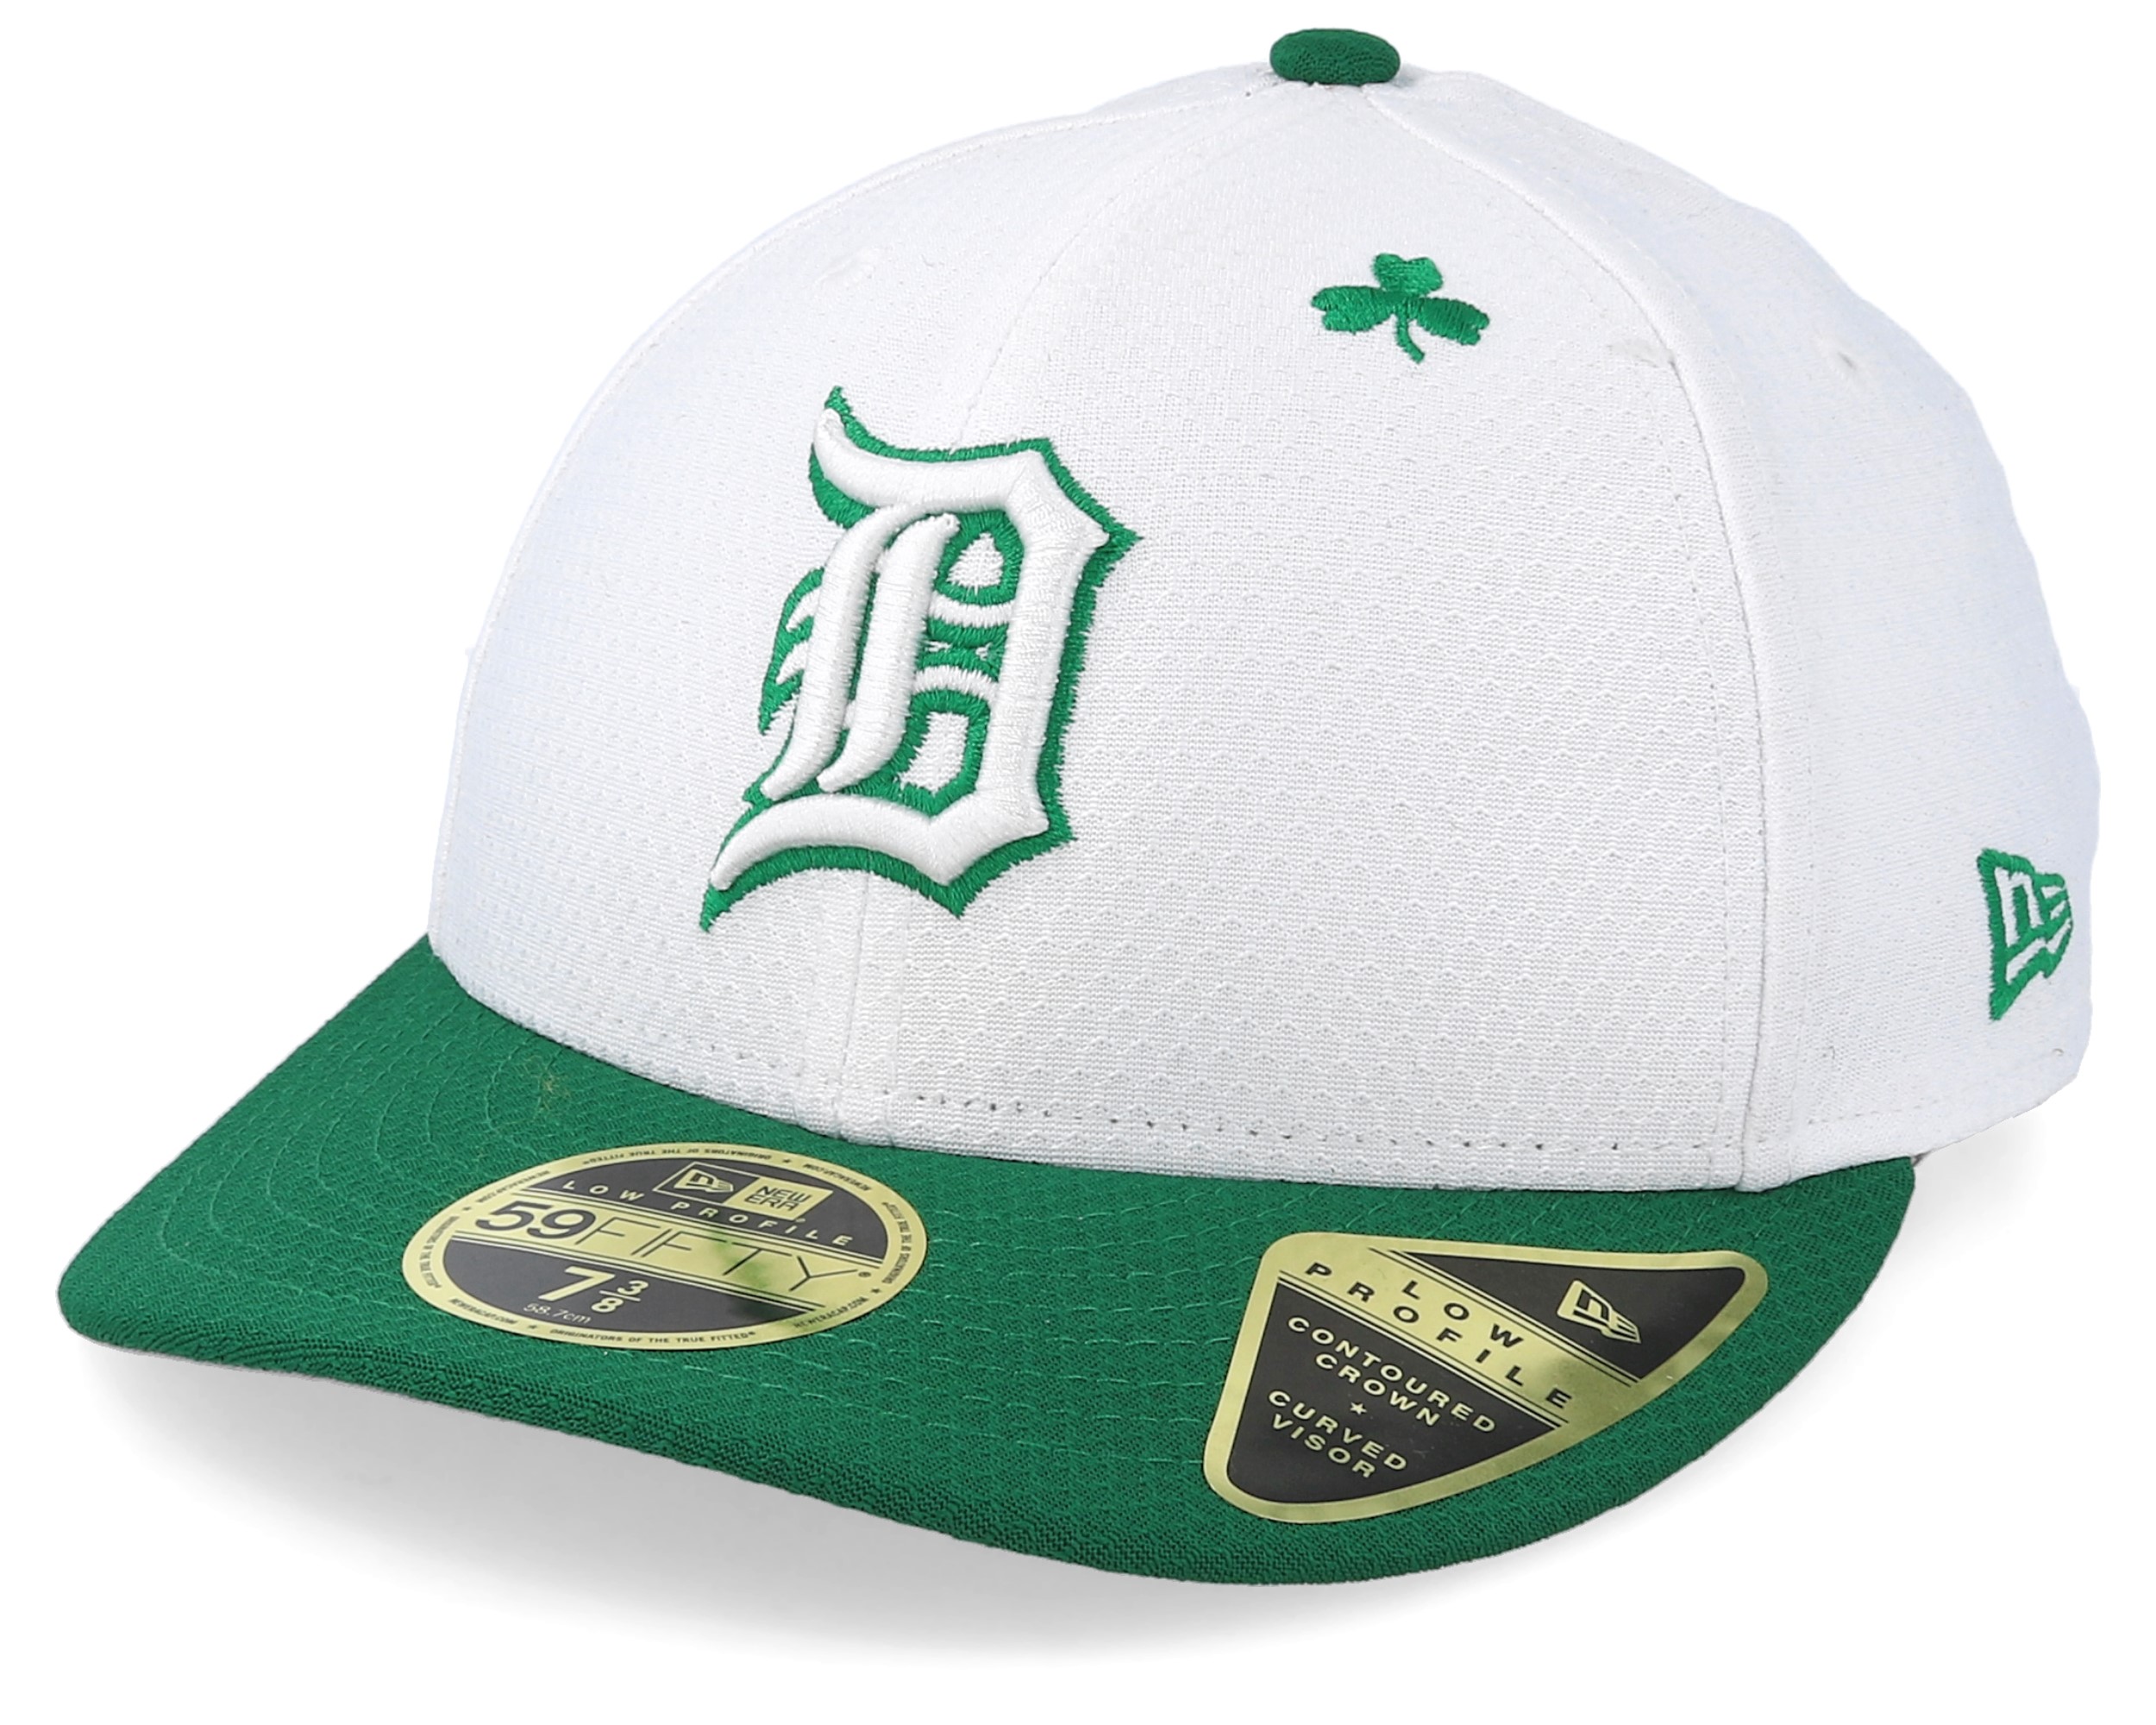 New Era Authentic Collection Low Profile 59Fifty Cap - Oakland